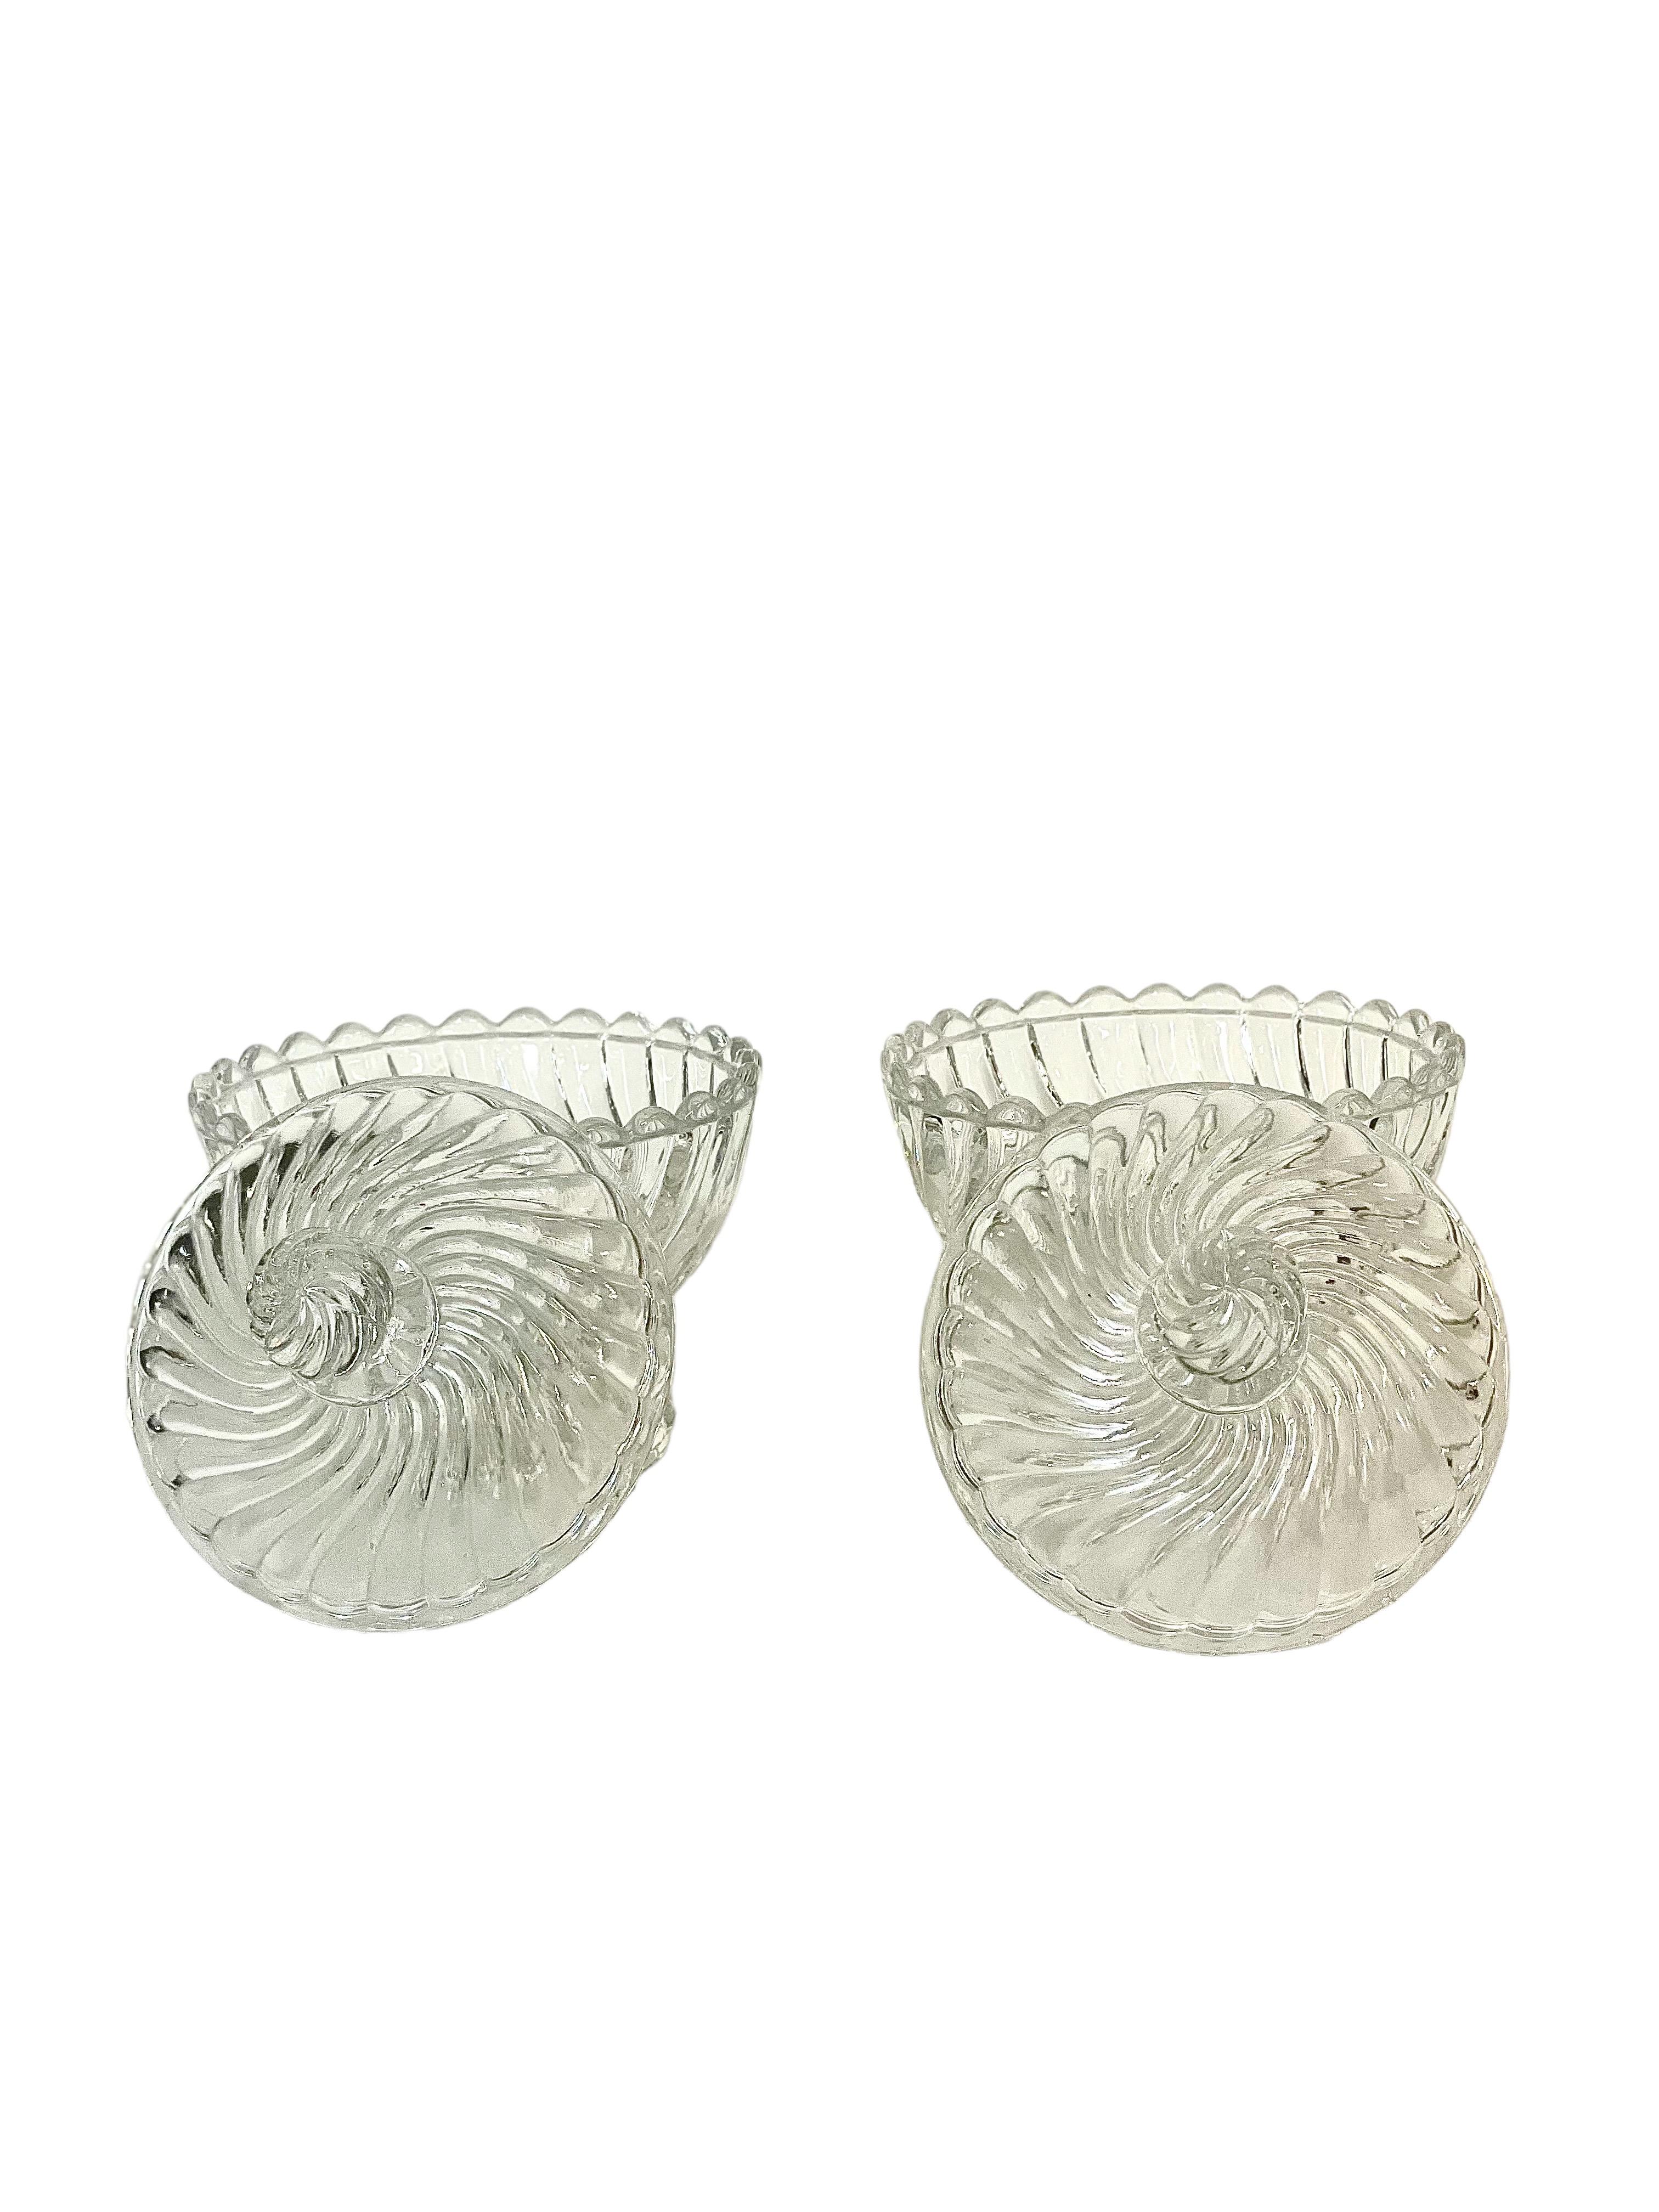 A charming pair of moulded crystal lidded bonbonnières (sweet dishes) or possibly sugar bowls, from the famous French crystal manufacturer Baccarat. Adorned all around the bodies and stoppers with wonderful twisted gadroons, these early 20th century